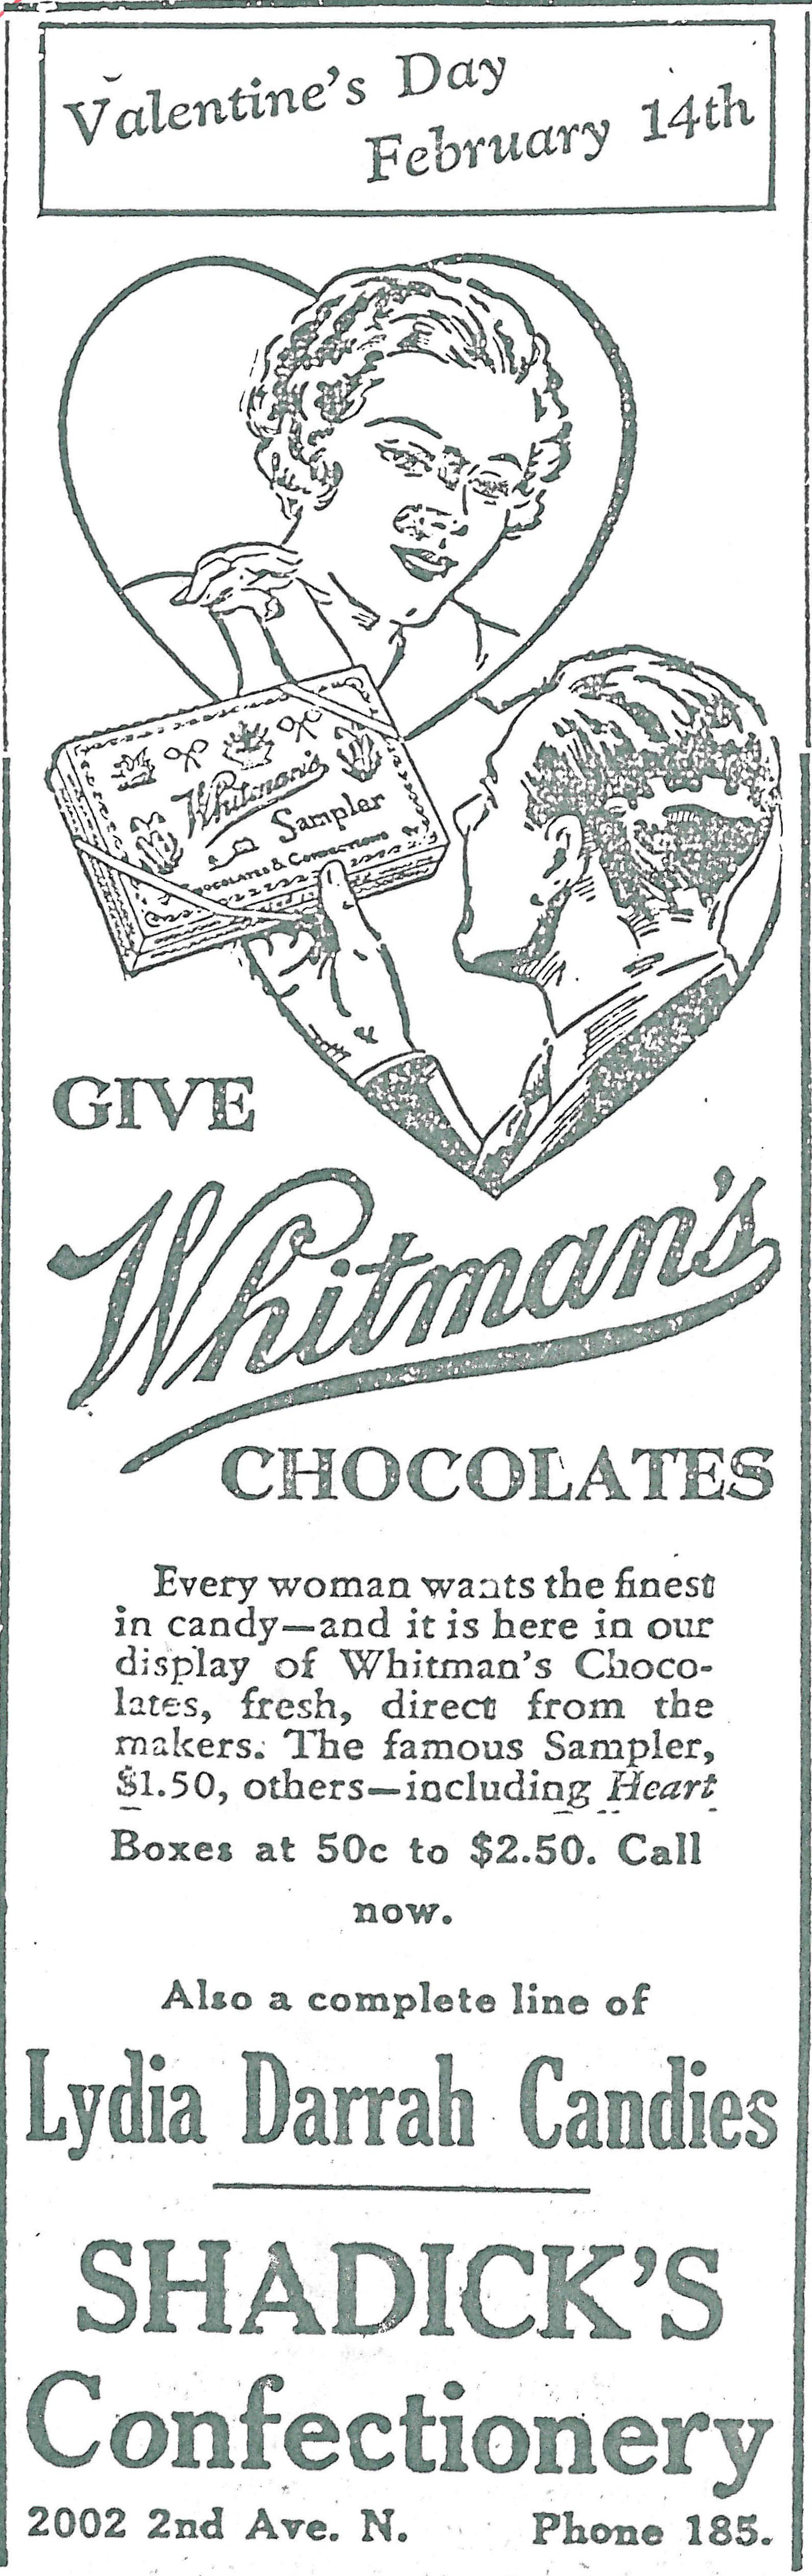 GiveWhitmans_2.7.1940.jpg